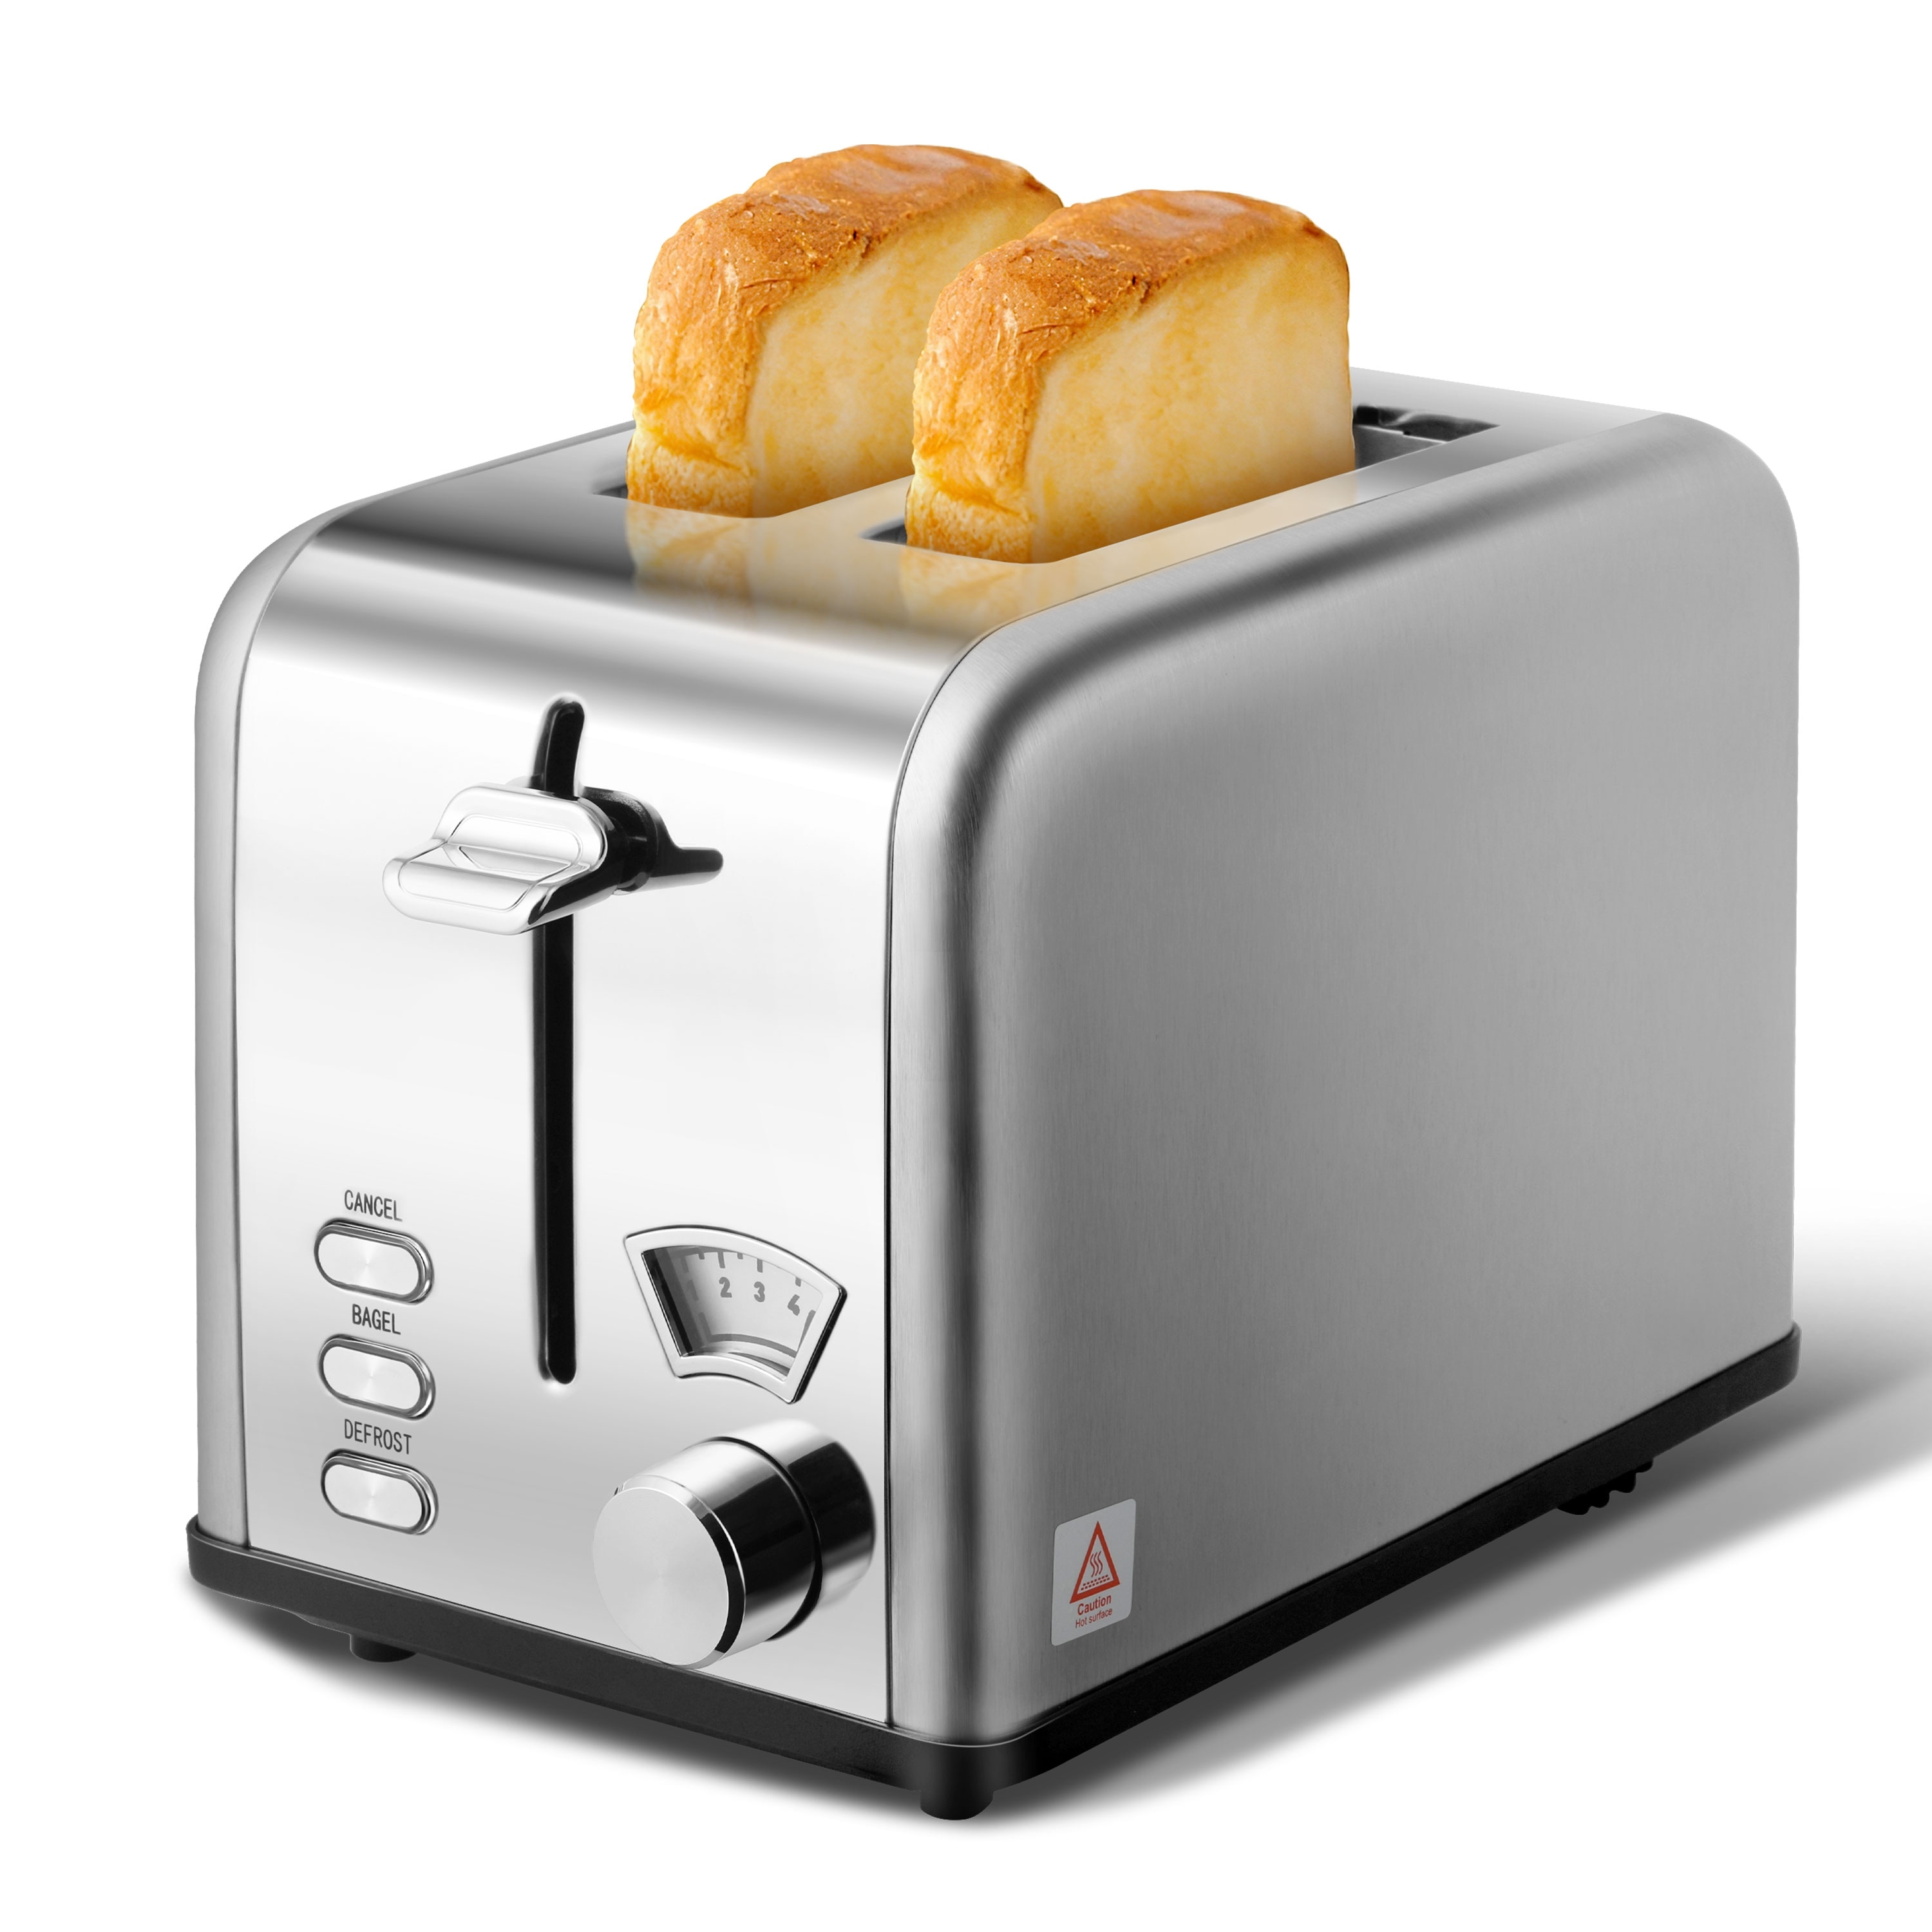 2-Slice Toaster with 1.5 inch Wide Slot, 5 Browning Setting and 3 Function,Toast Bread Machine with Removable Crumb Tray